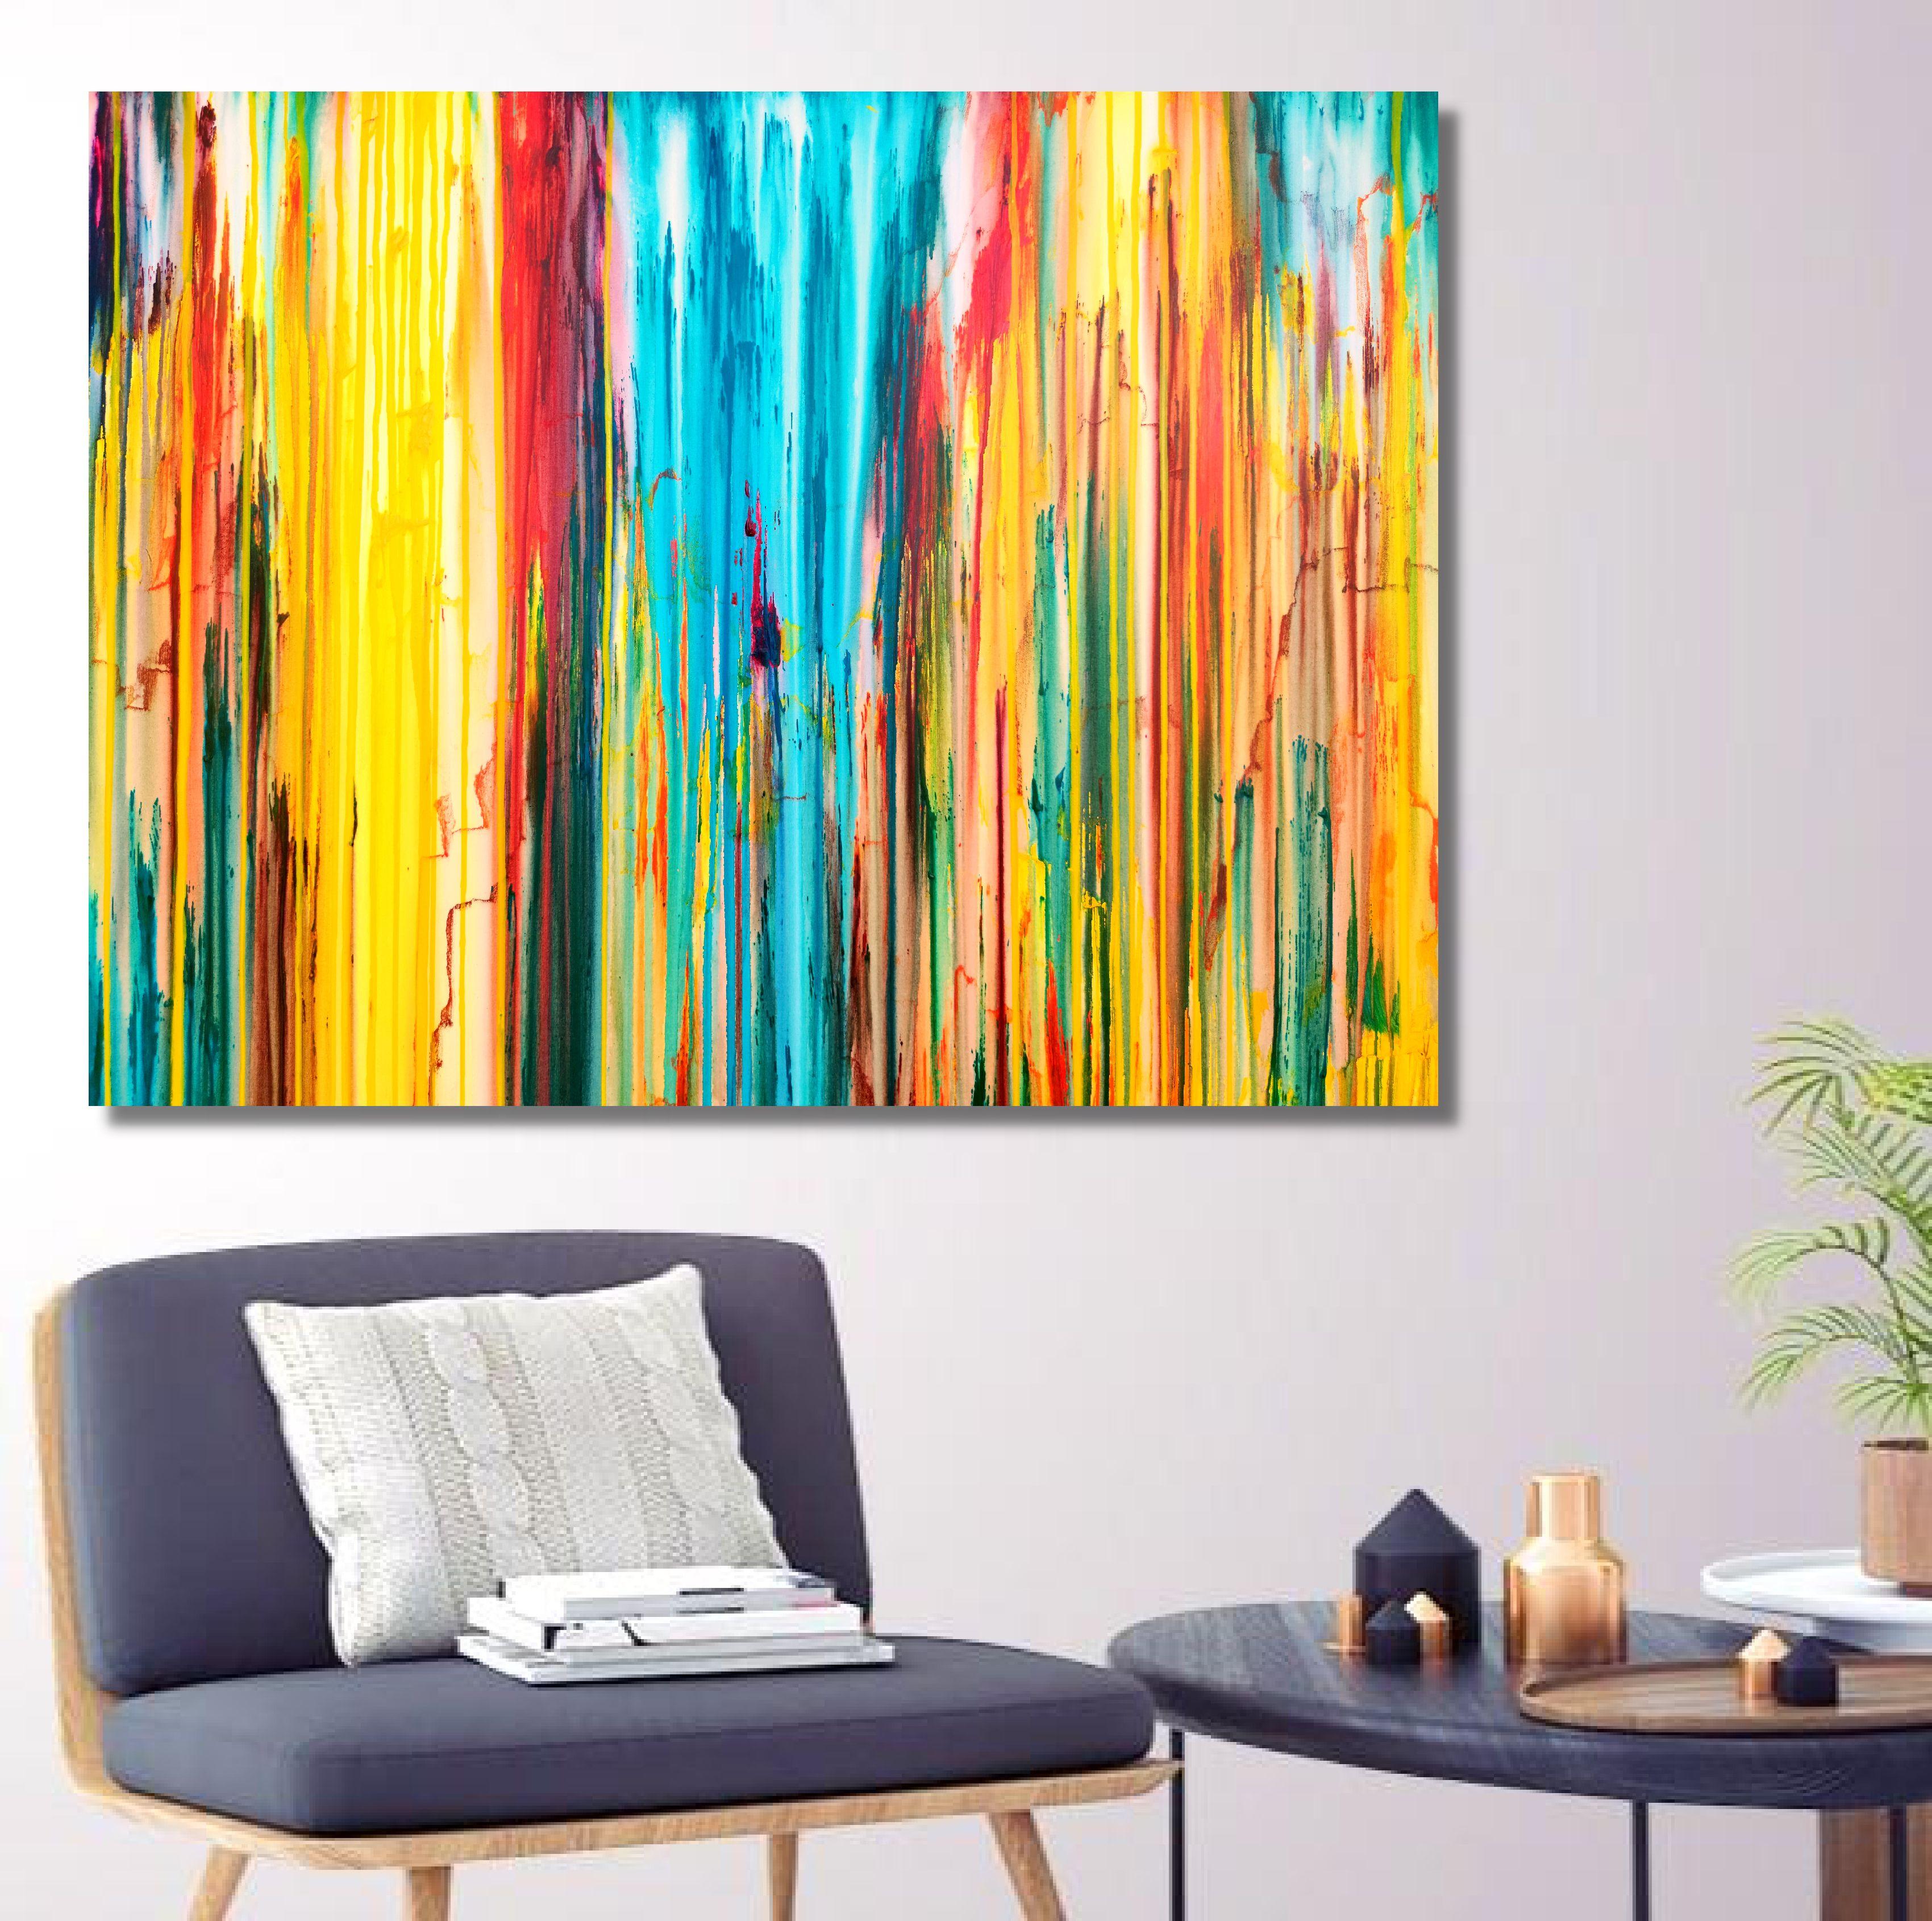 The Emotional Creation #303, Painting, Acrylic on Canvas - Orange Abstract Painting by Carla Sá Fernandes